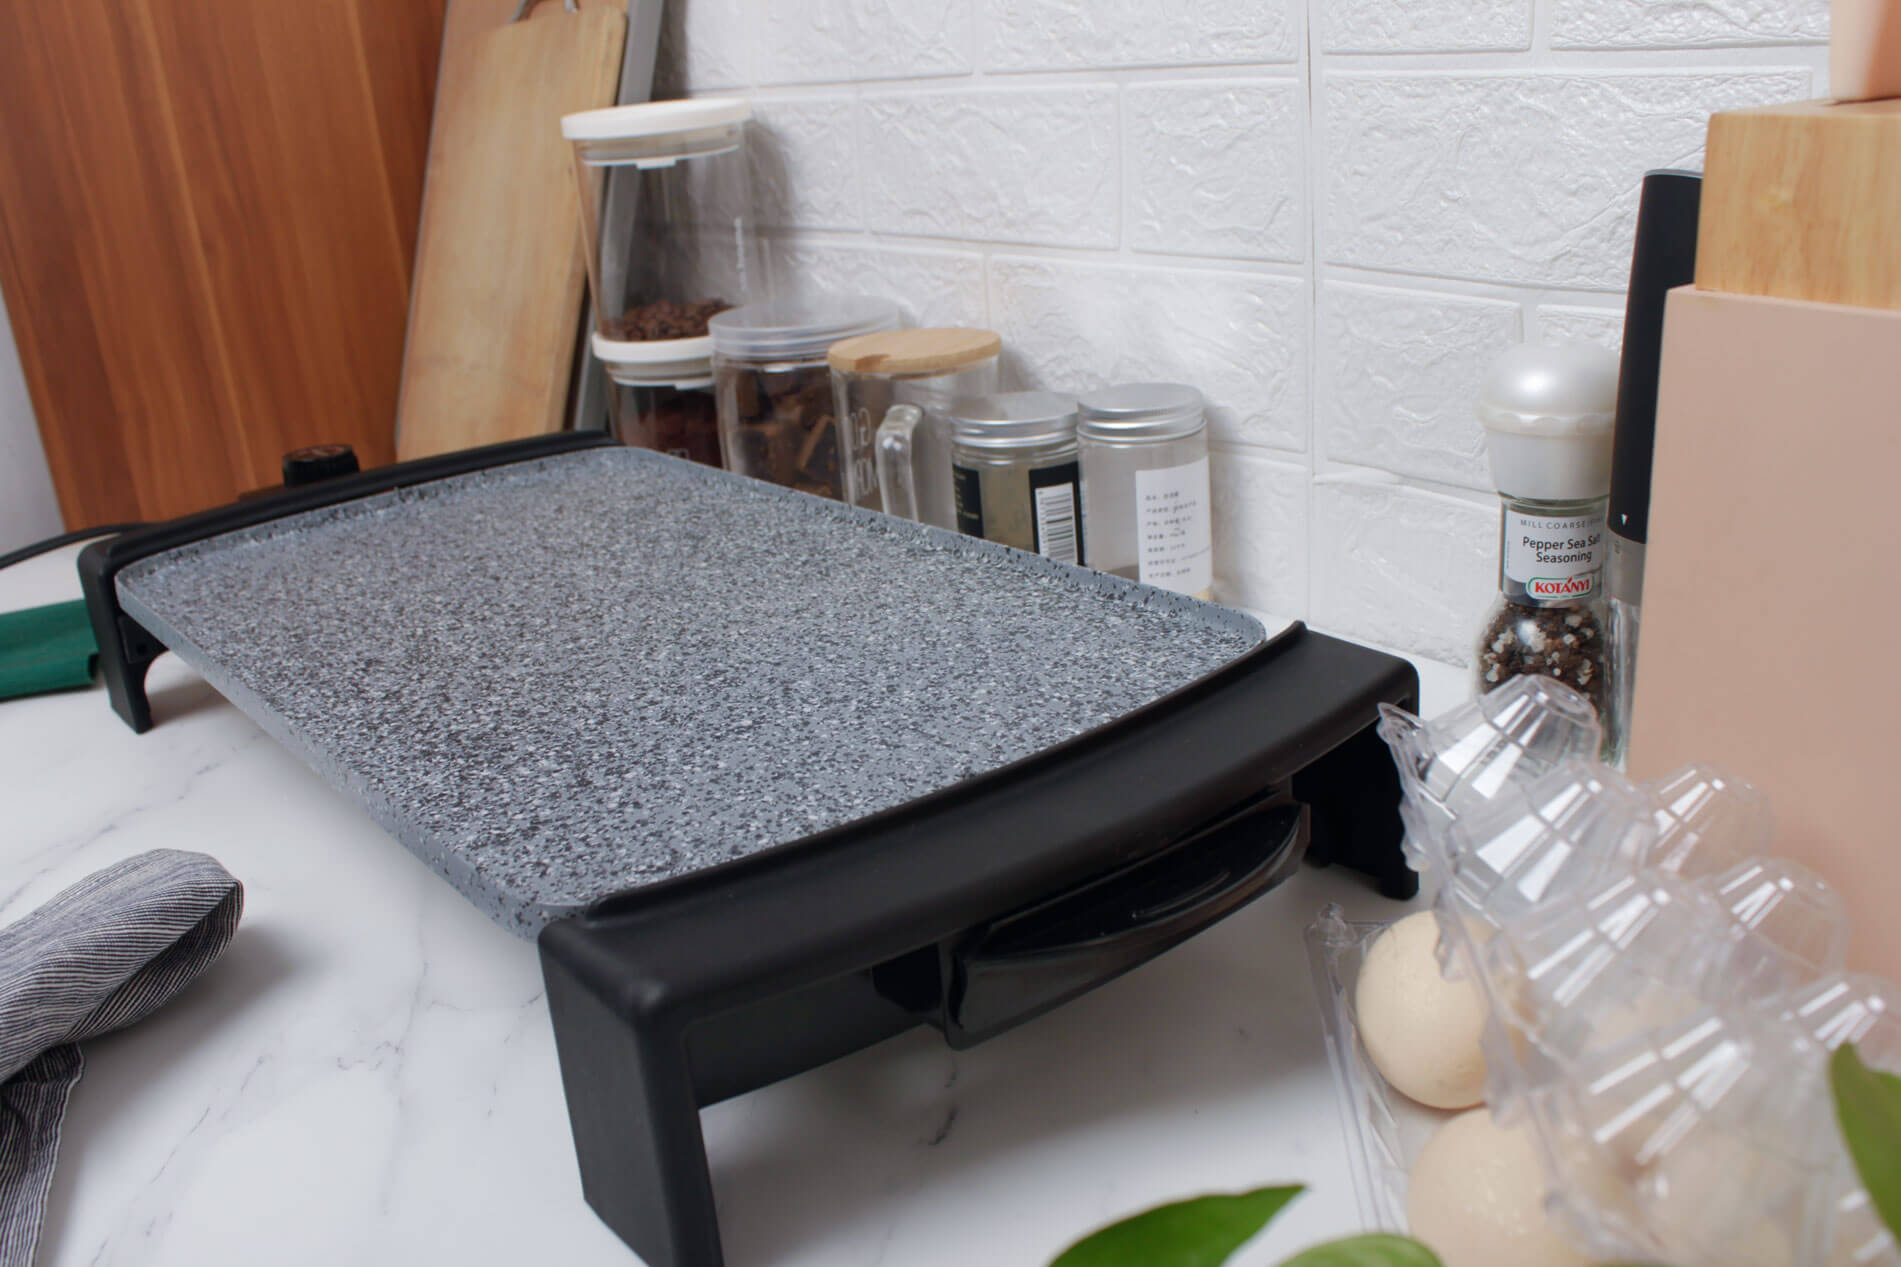 Electric indoor griddle with natural maifan stone coating